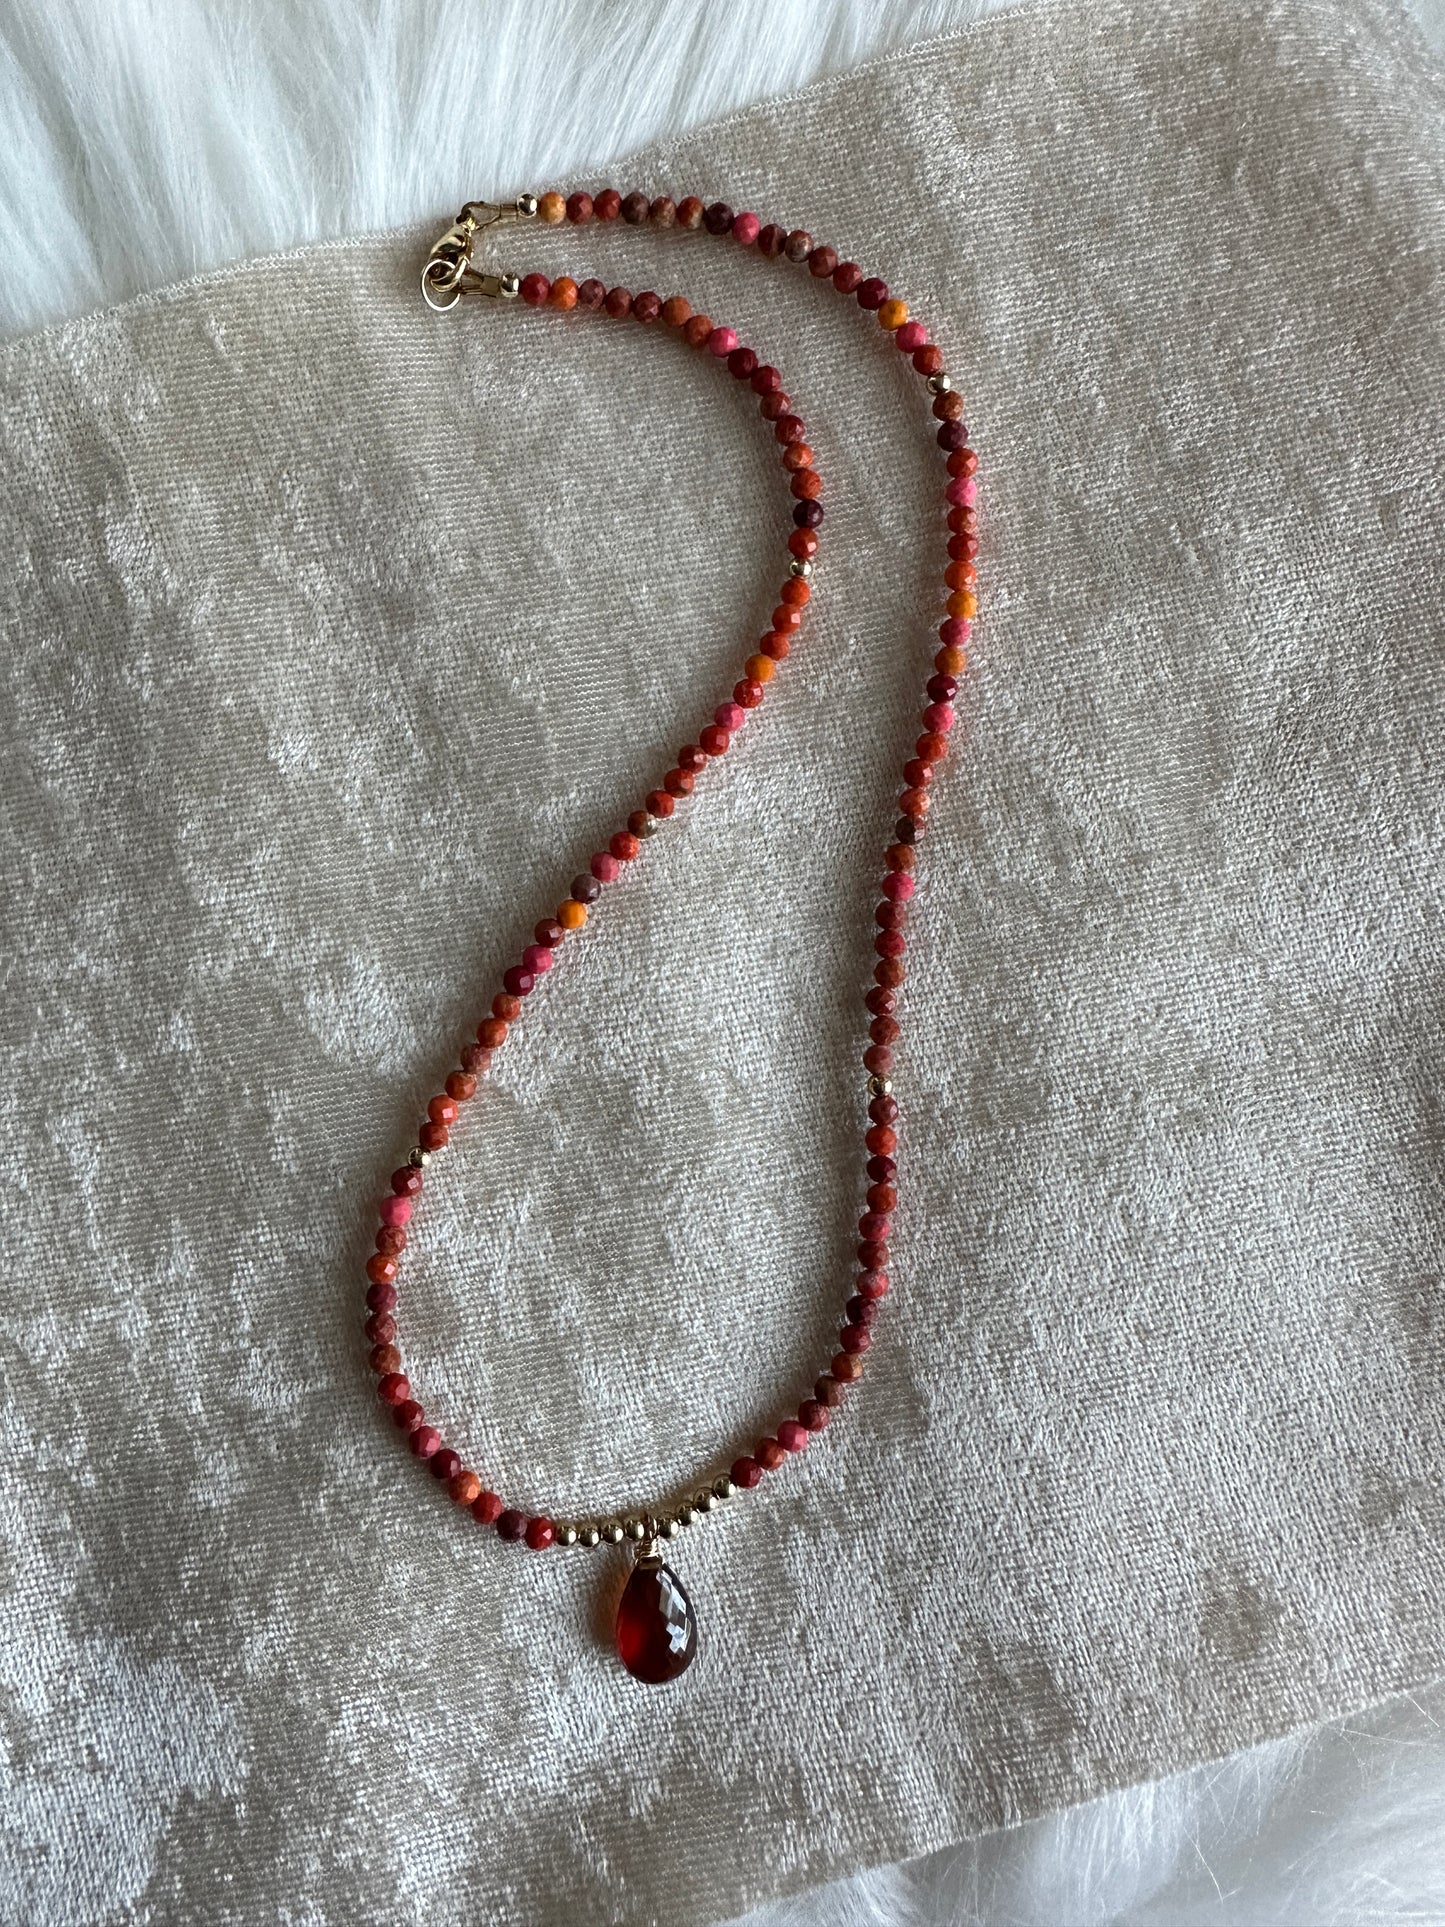 14kt Gold Filled Dainty Coral and Garnet Necklace